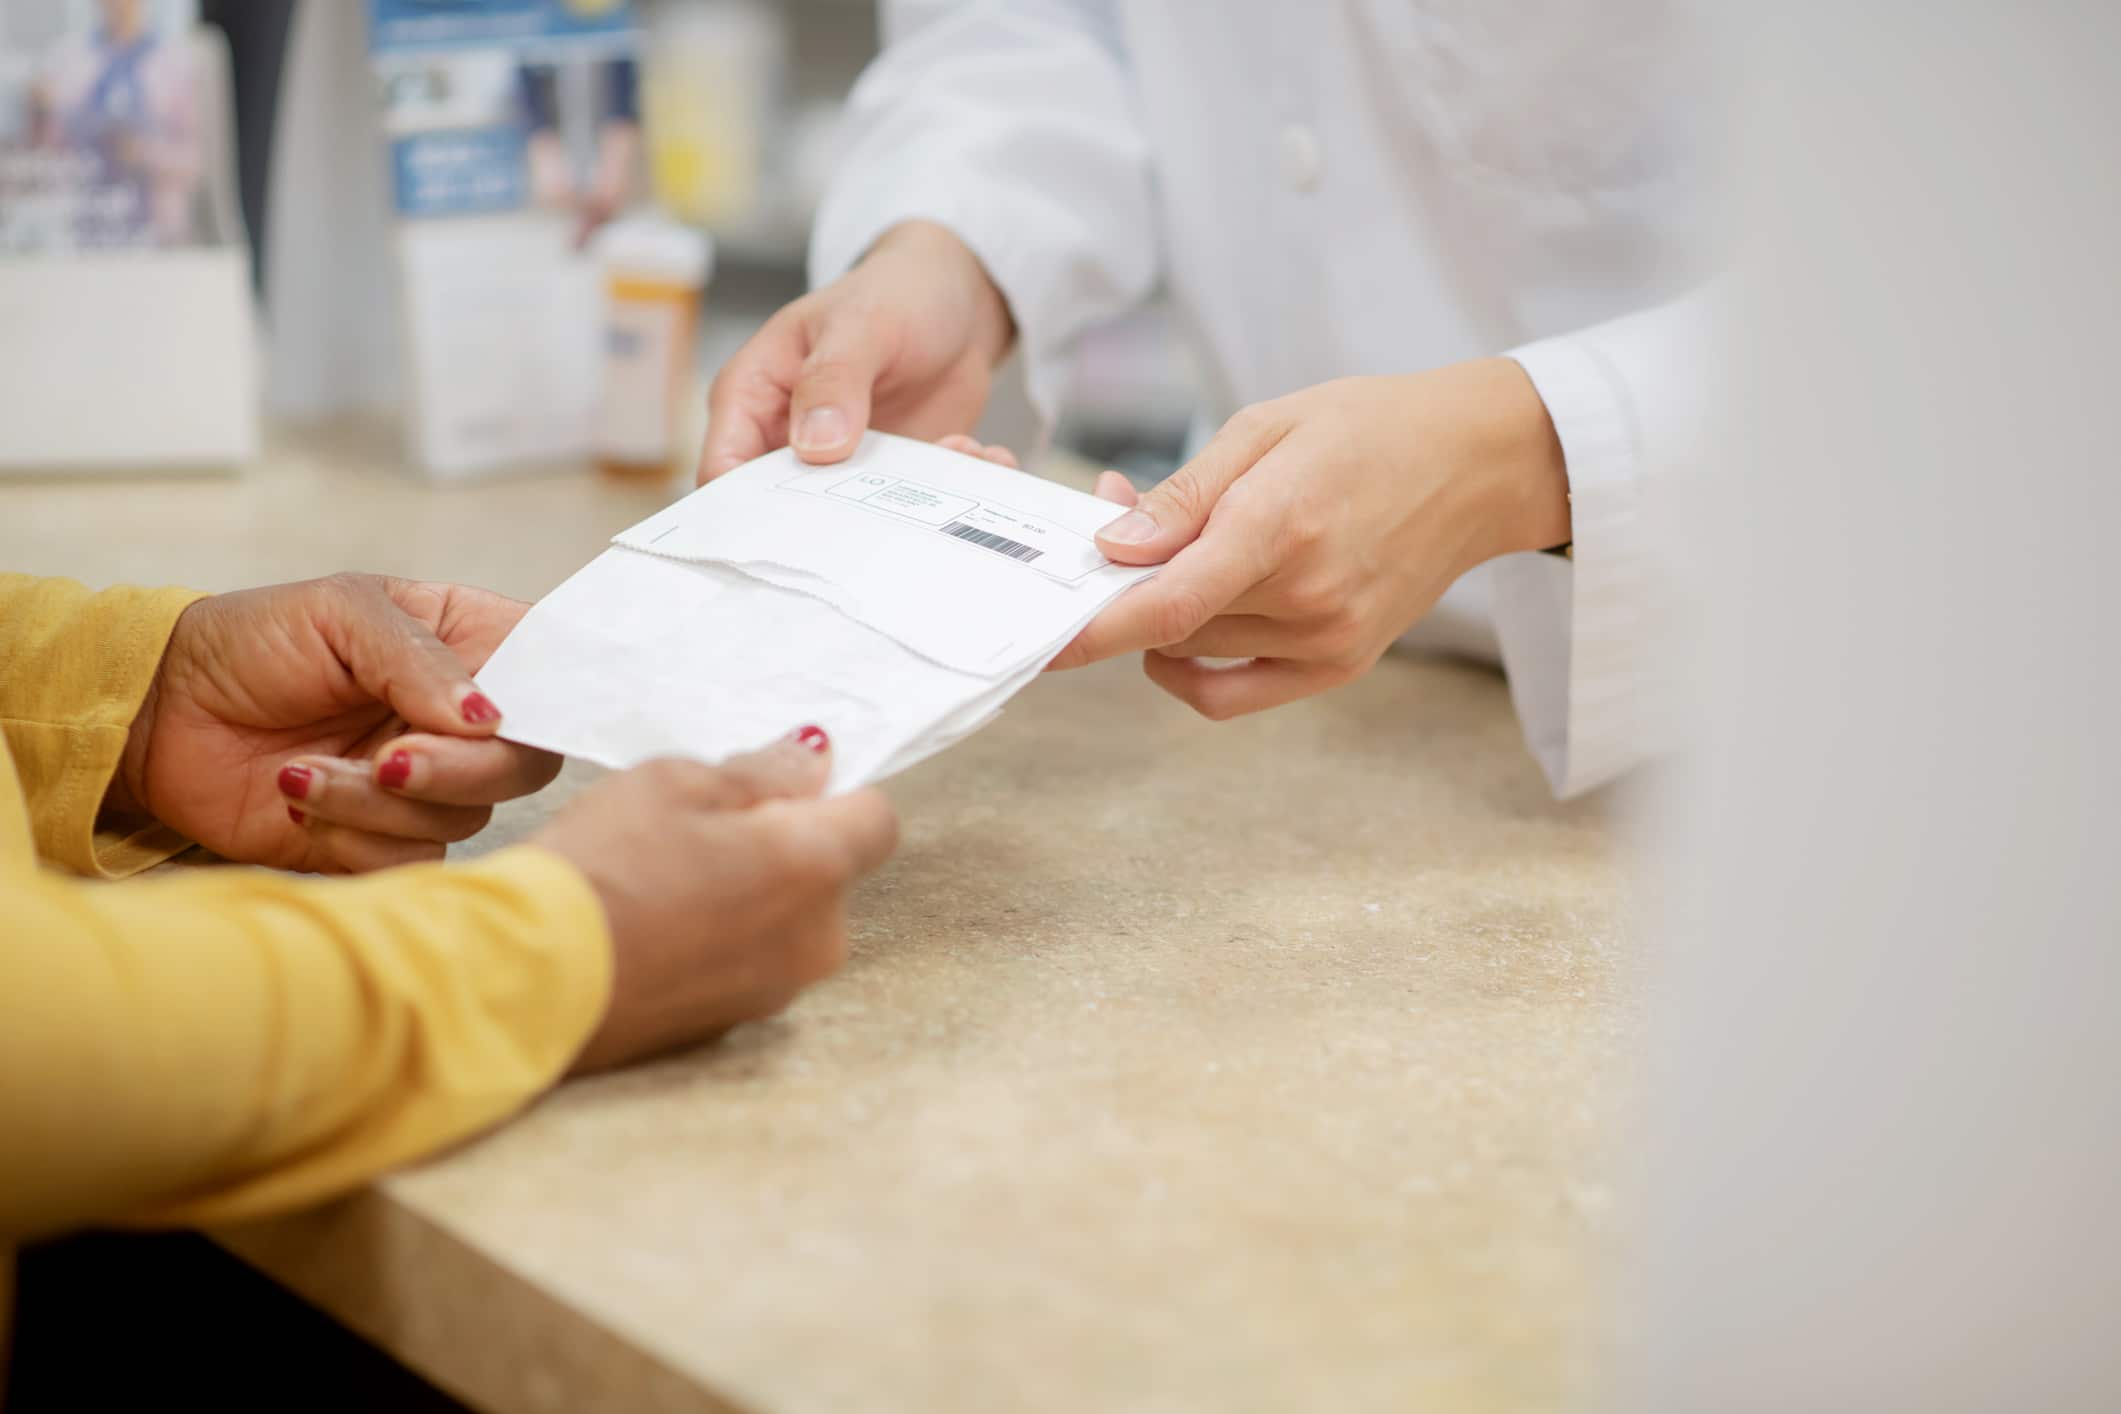 A pharmacist hands over a patients prescription medication after explaining the side effects and instructions for taking it